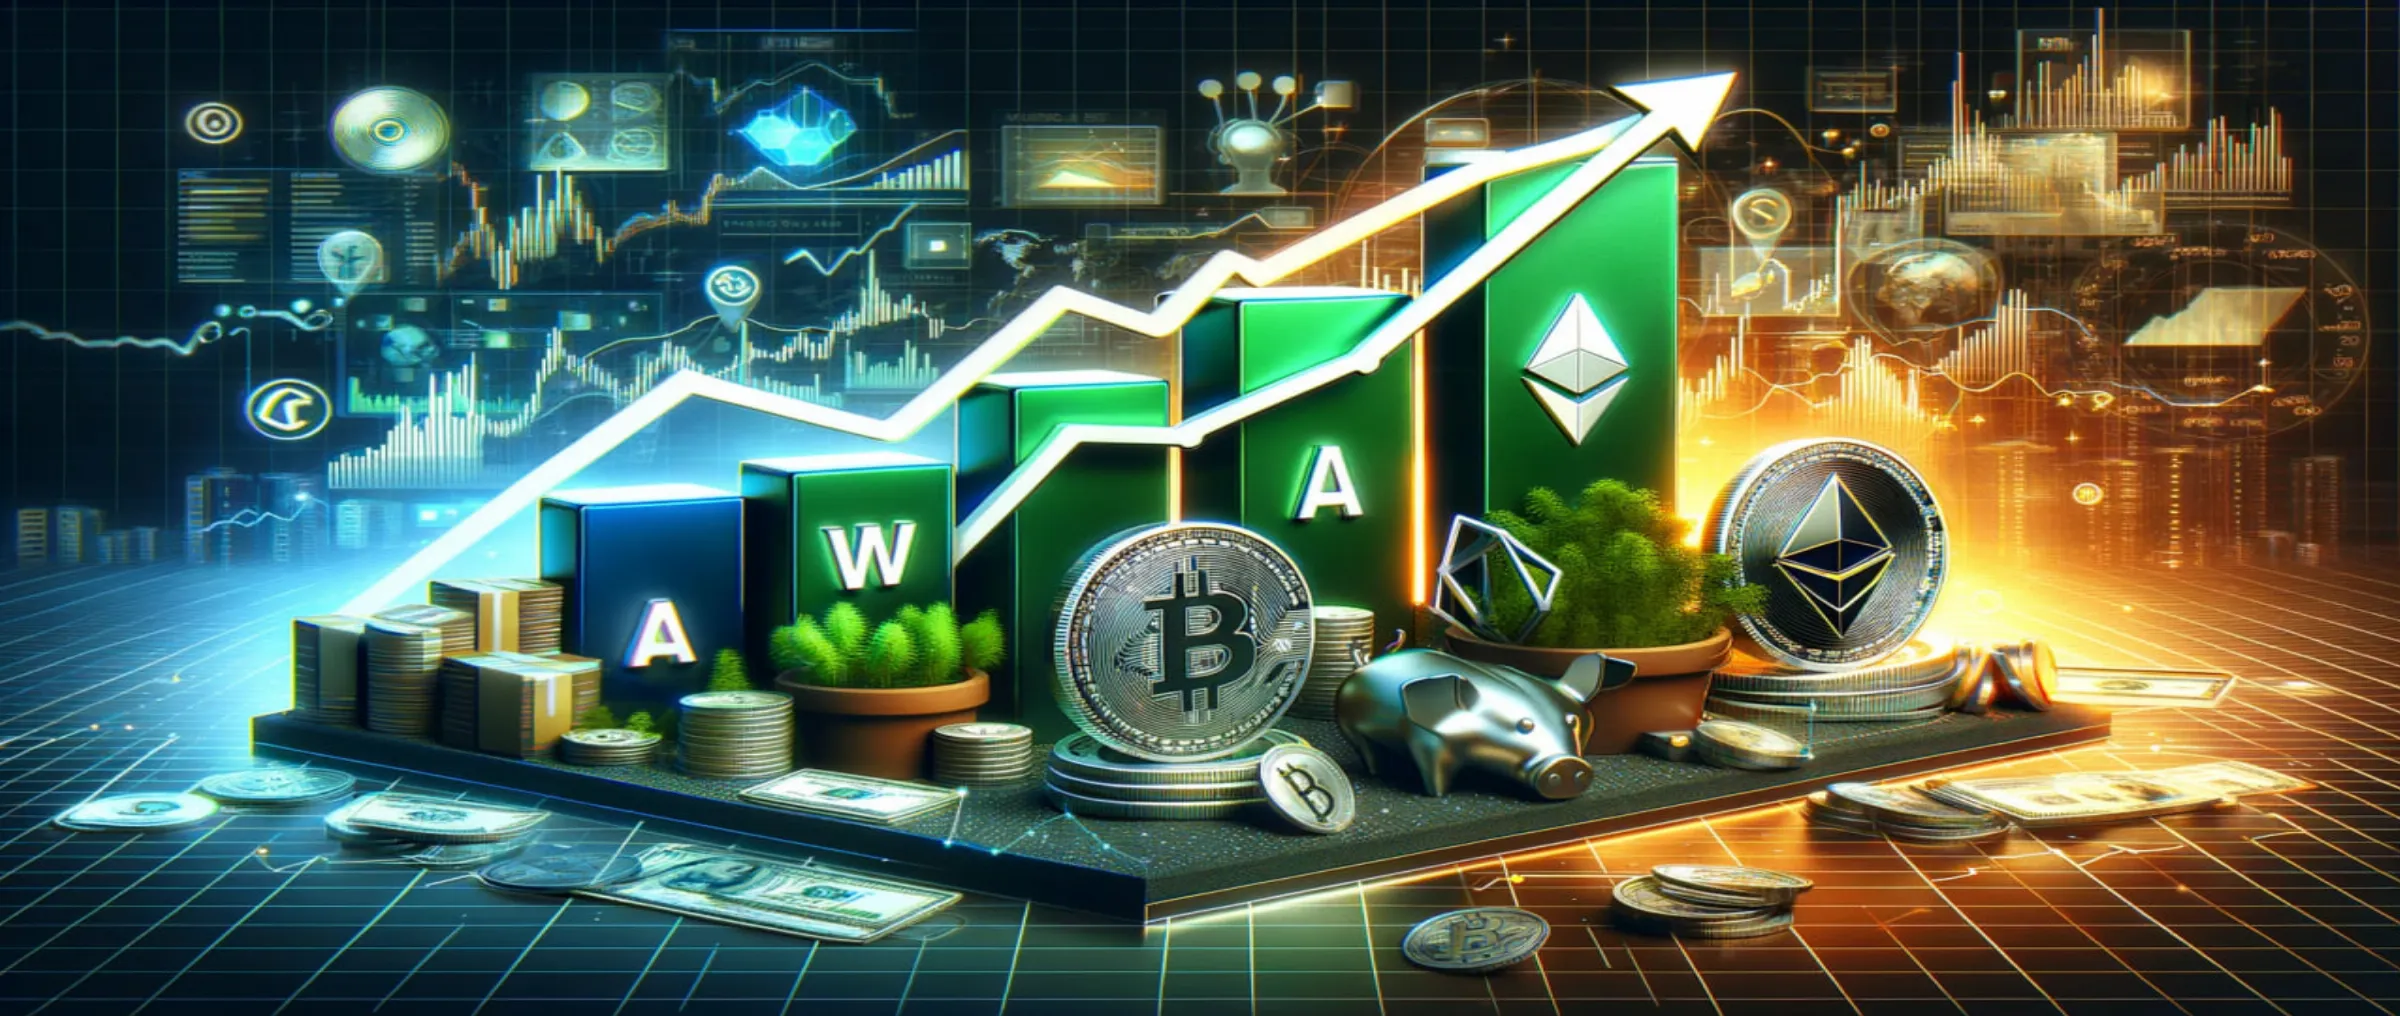 The growth of the RWA segment outpaces Bitcoin and Ethereum